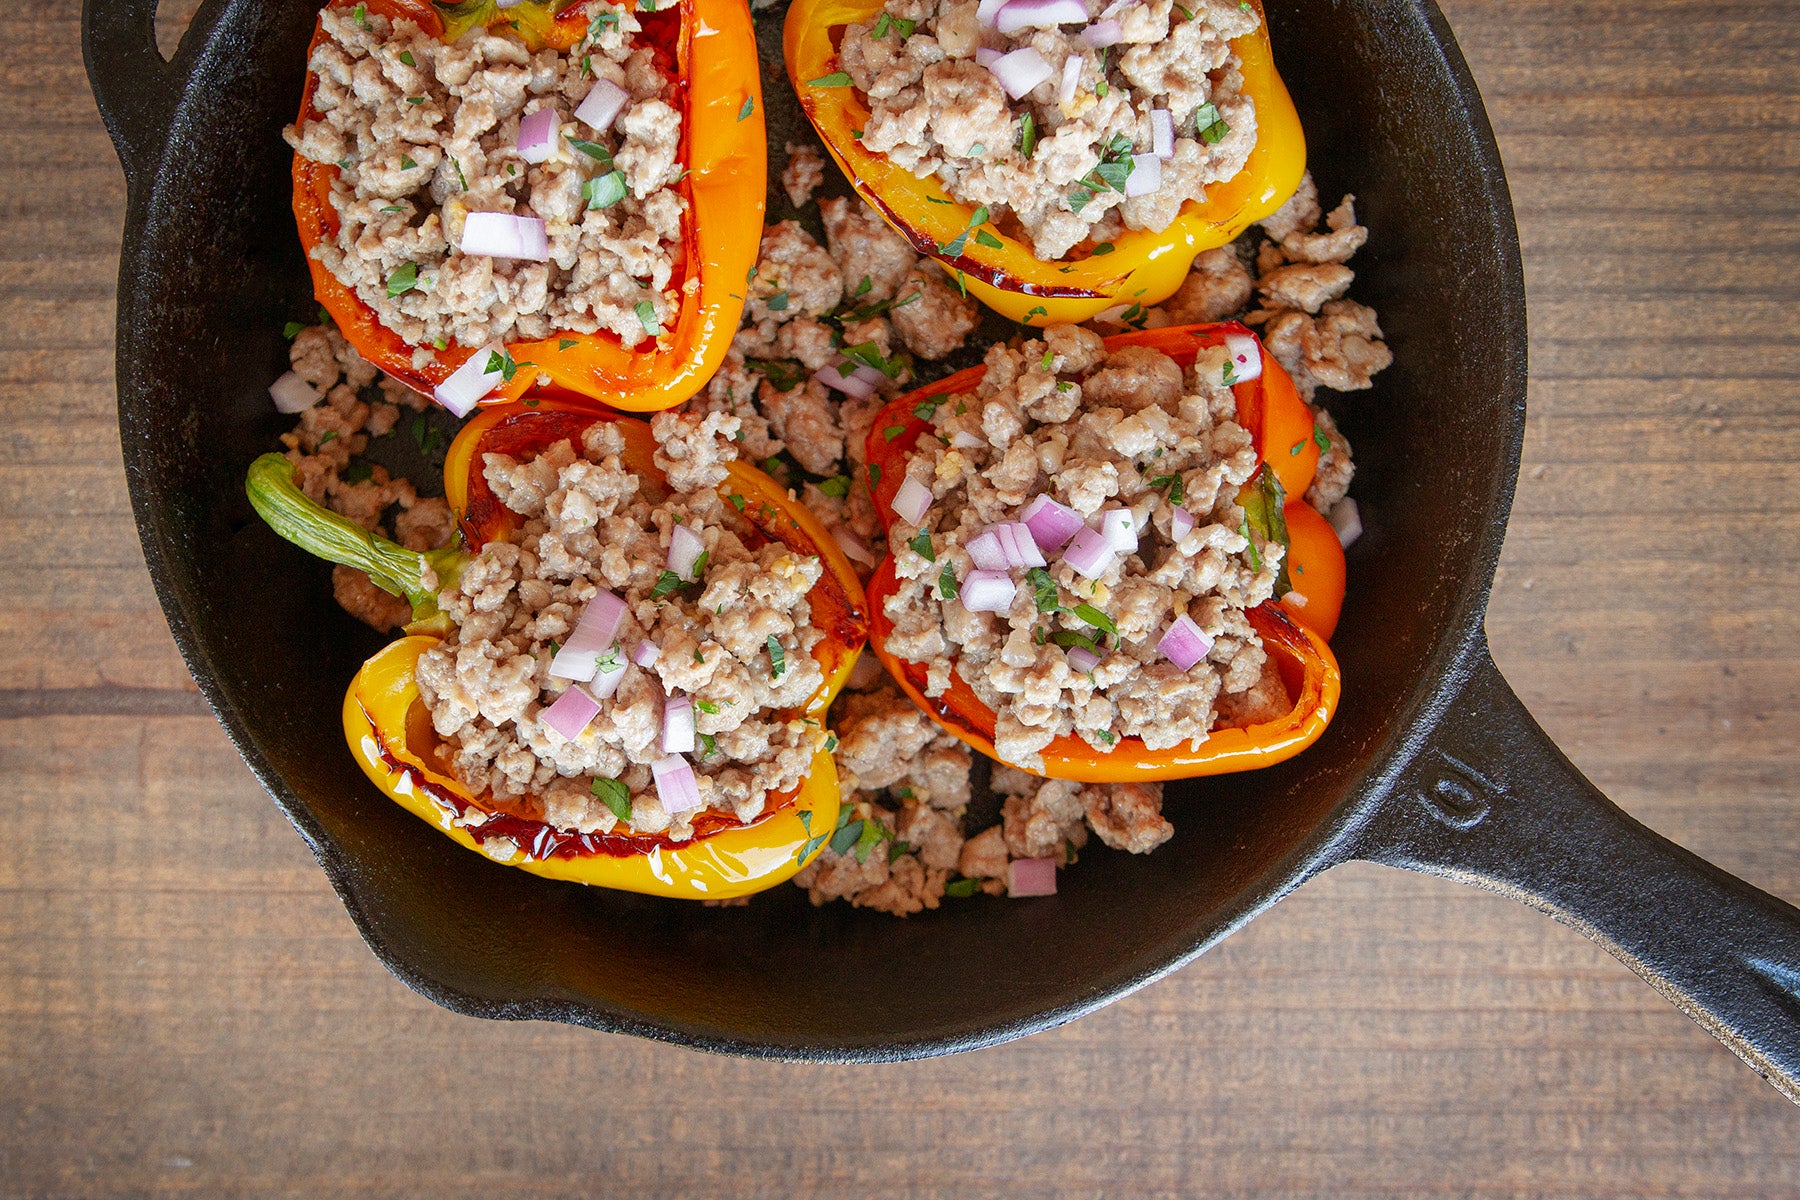 Four yellow and orange bell peppers are stuffed with cooked ground pork and onions. They sit inside a cast iron skillet on a wooden tabletop.